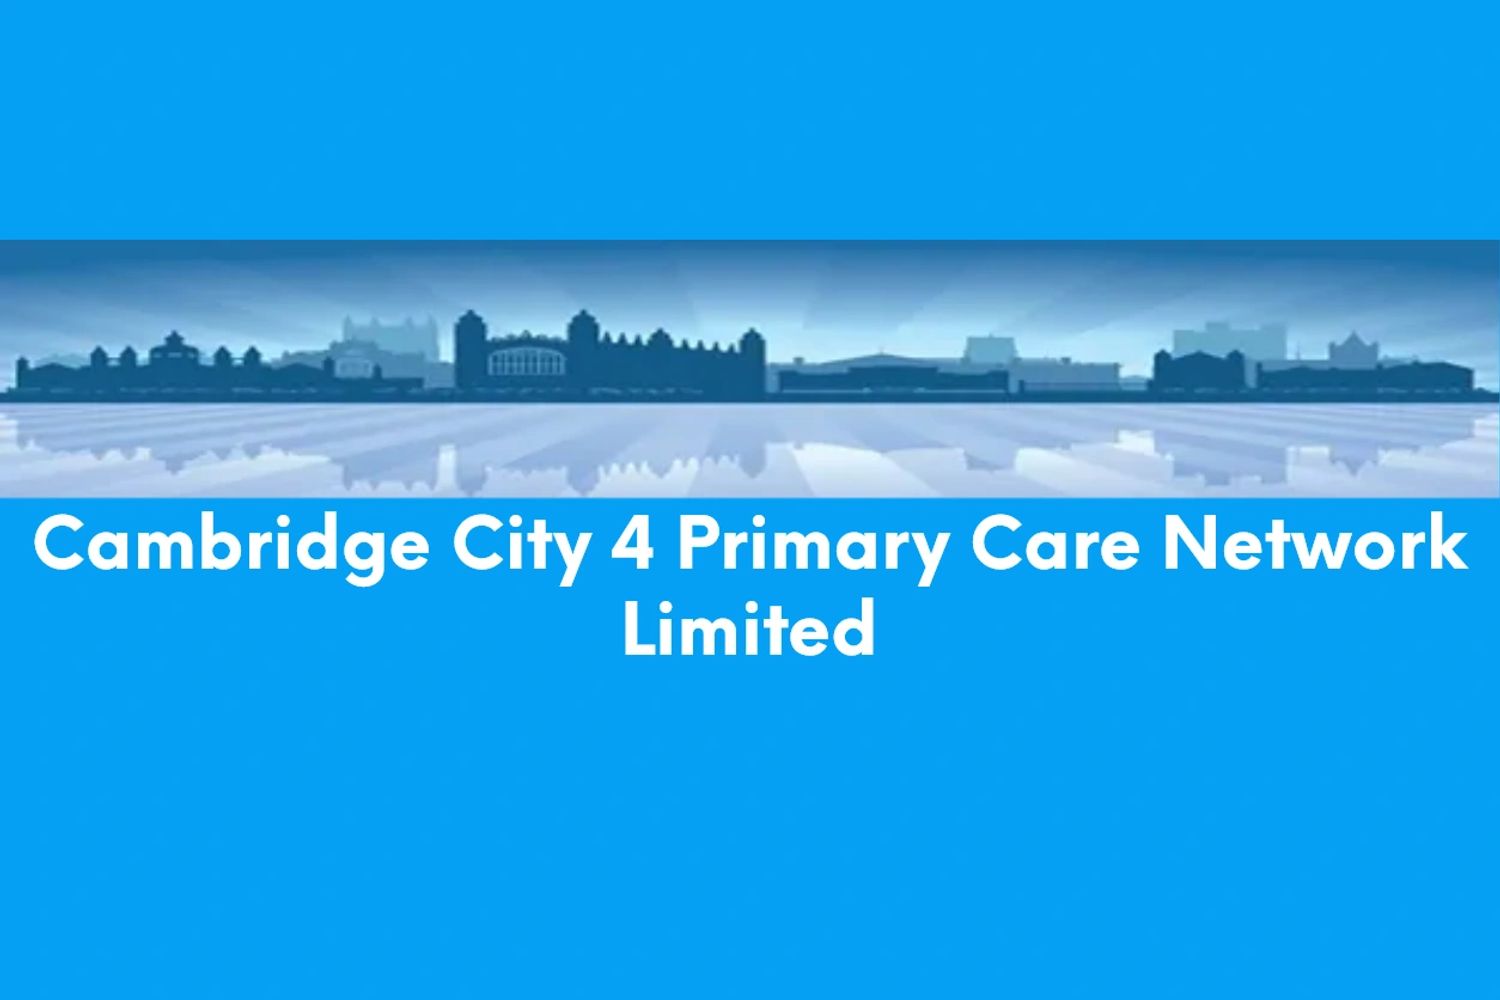 Skyline of Cambridge buildings in blue with the text "Cambridge City 4 Primary Care Network Limited"